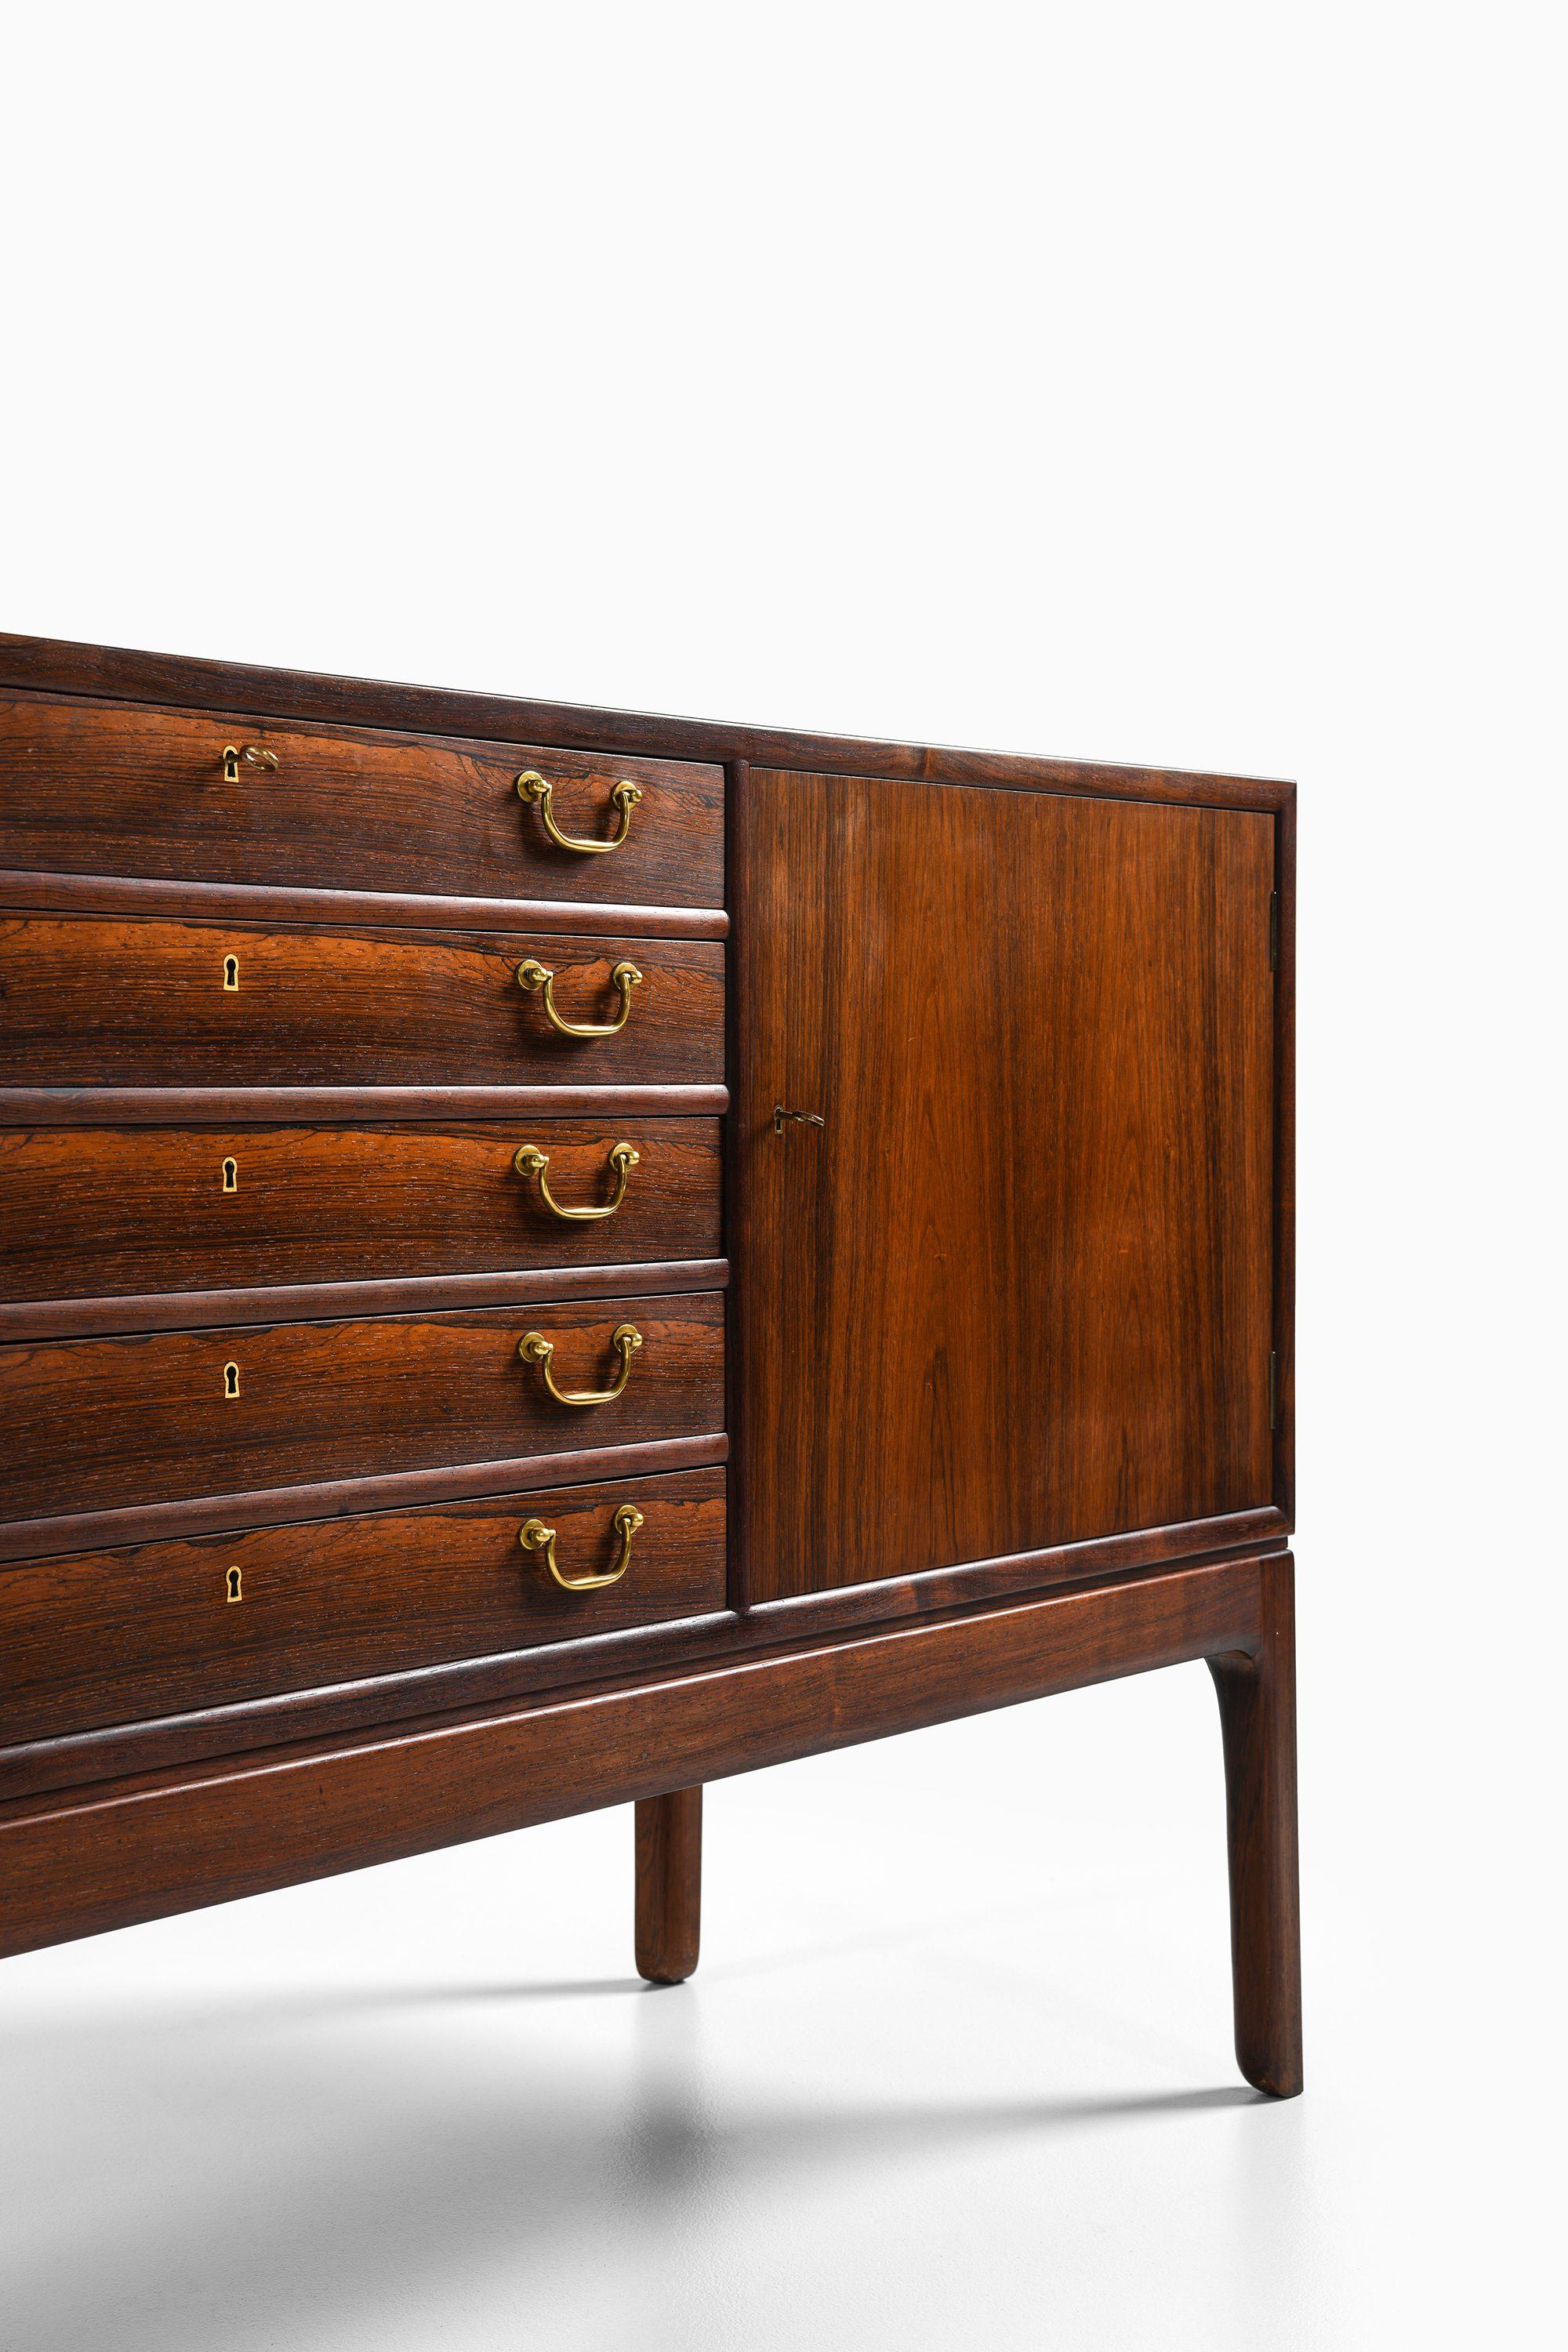 Mid-20th Century Sideboard in Rosewood and brass by Ole Wanscher For Sale